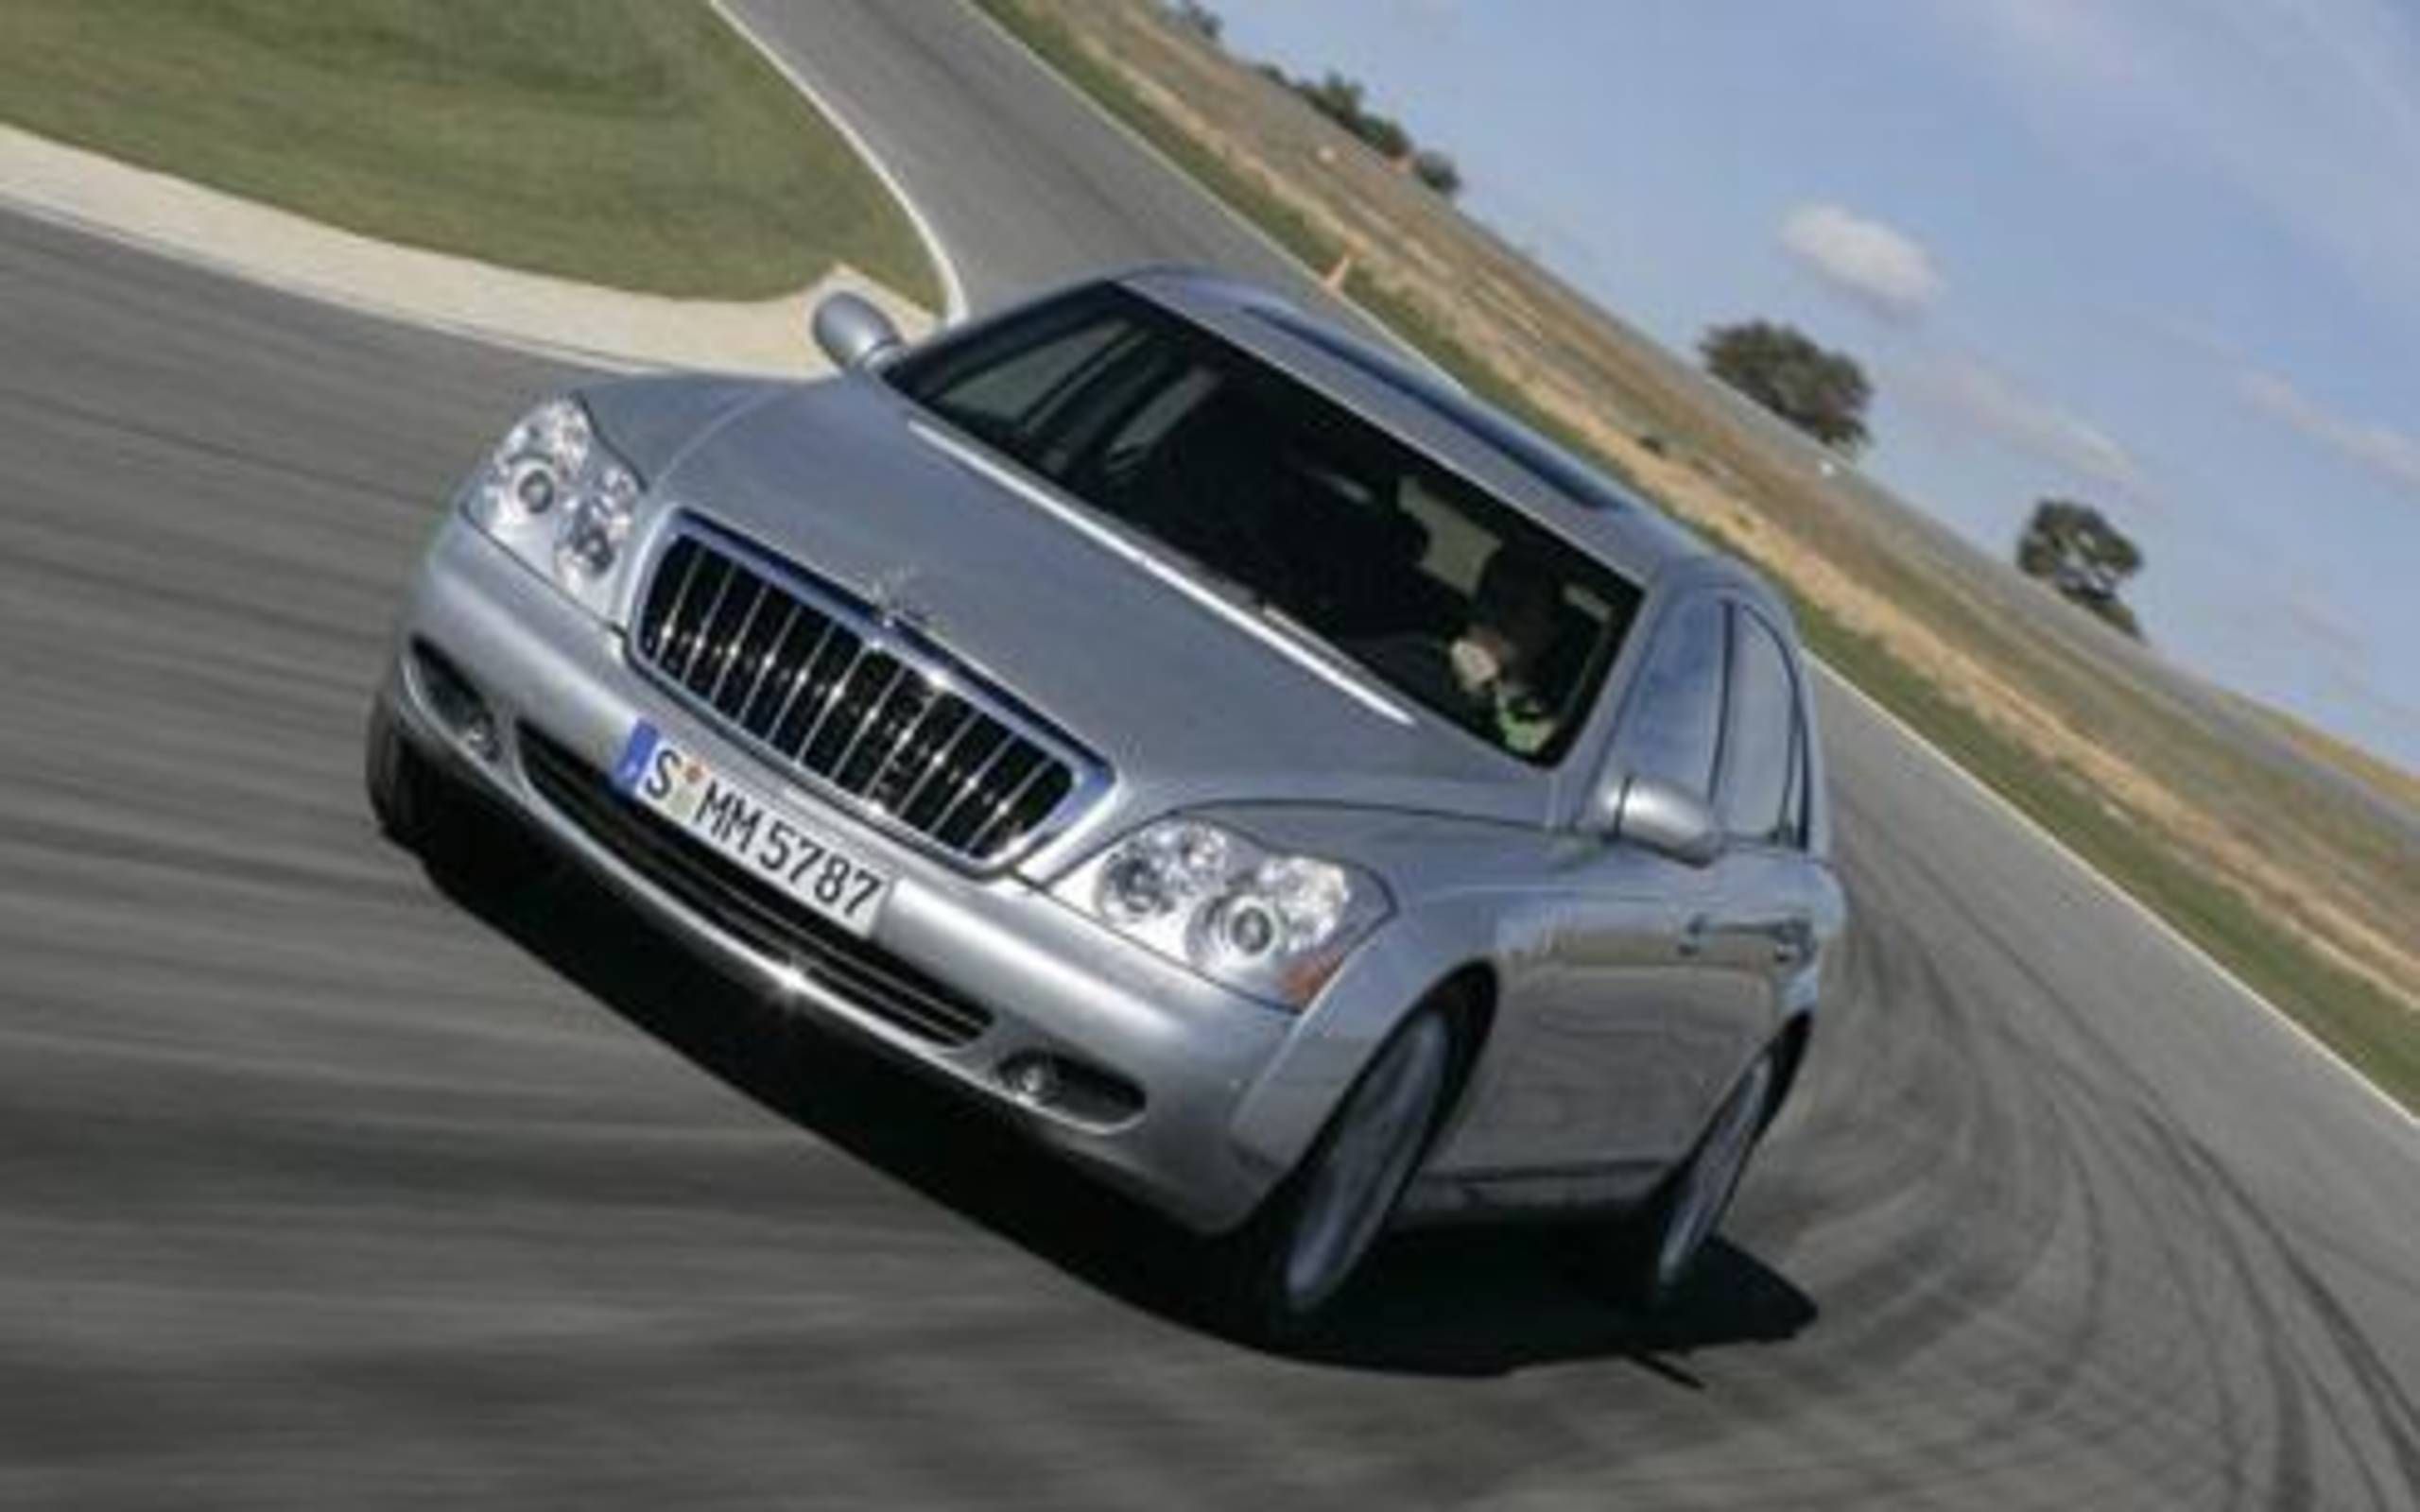 2006 Maybach 57 S: Luxury in Warp Drive: Maybach 57 S is one serious,  go-faster, elegant ride